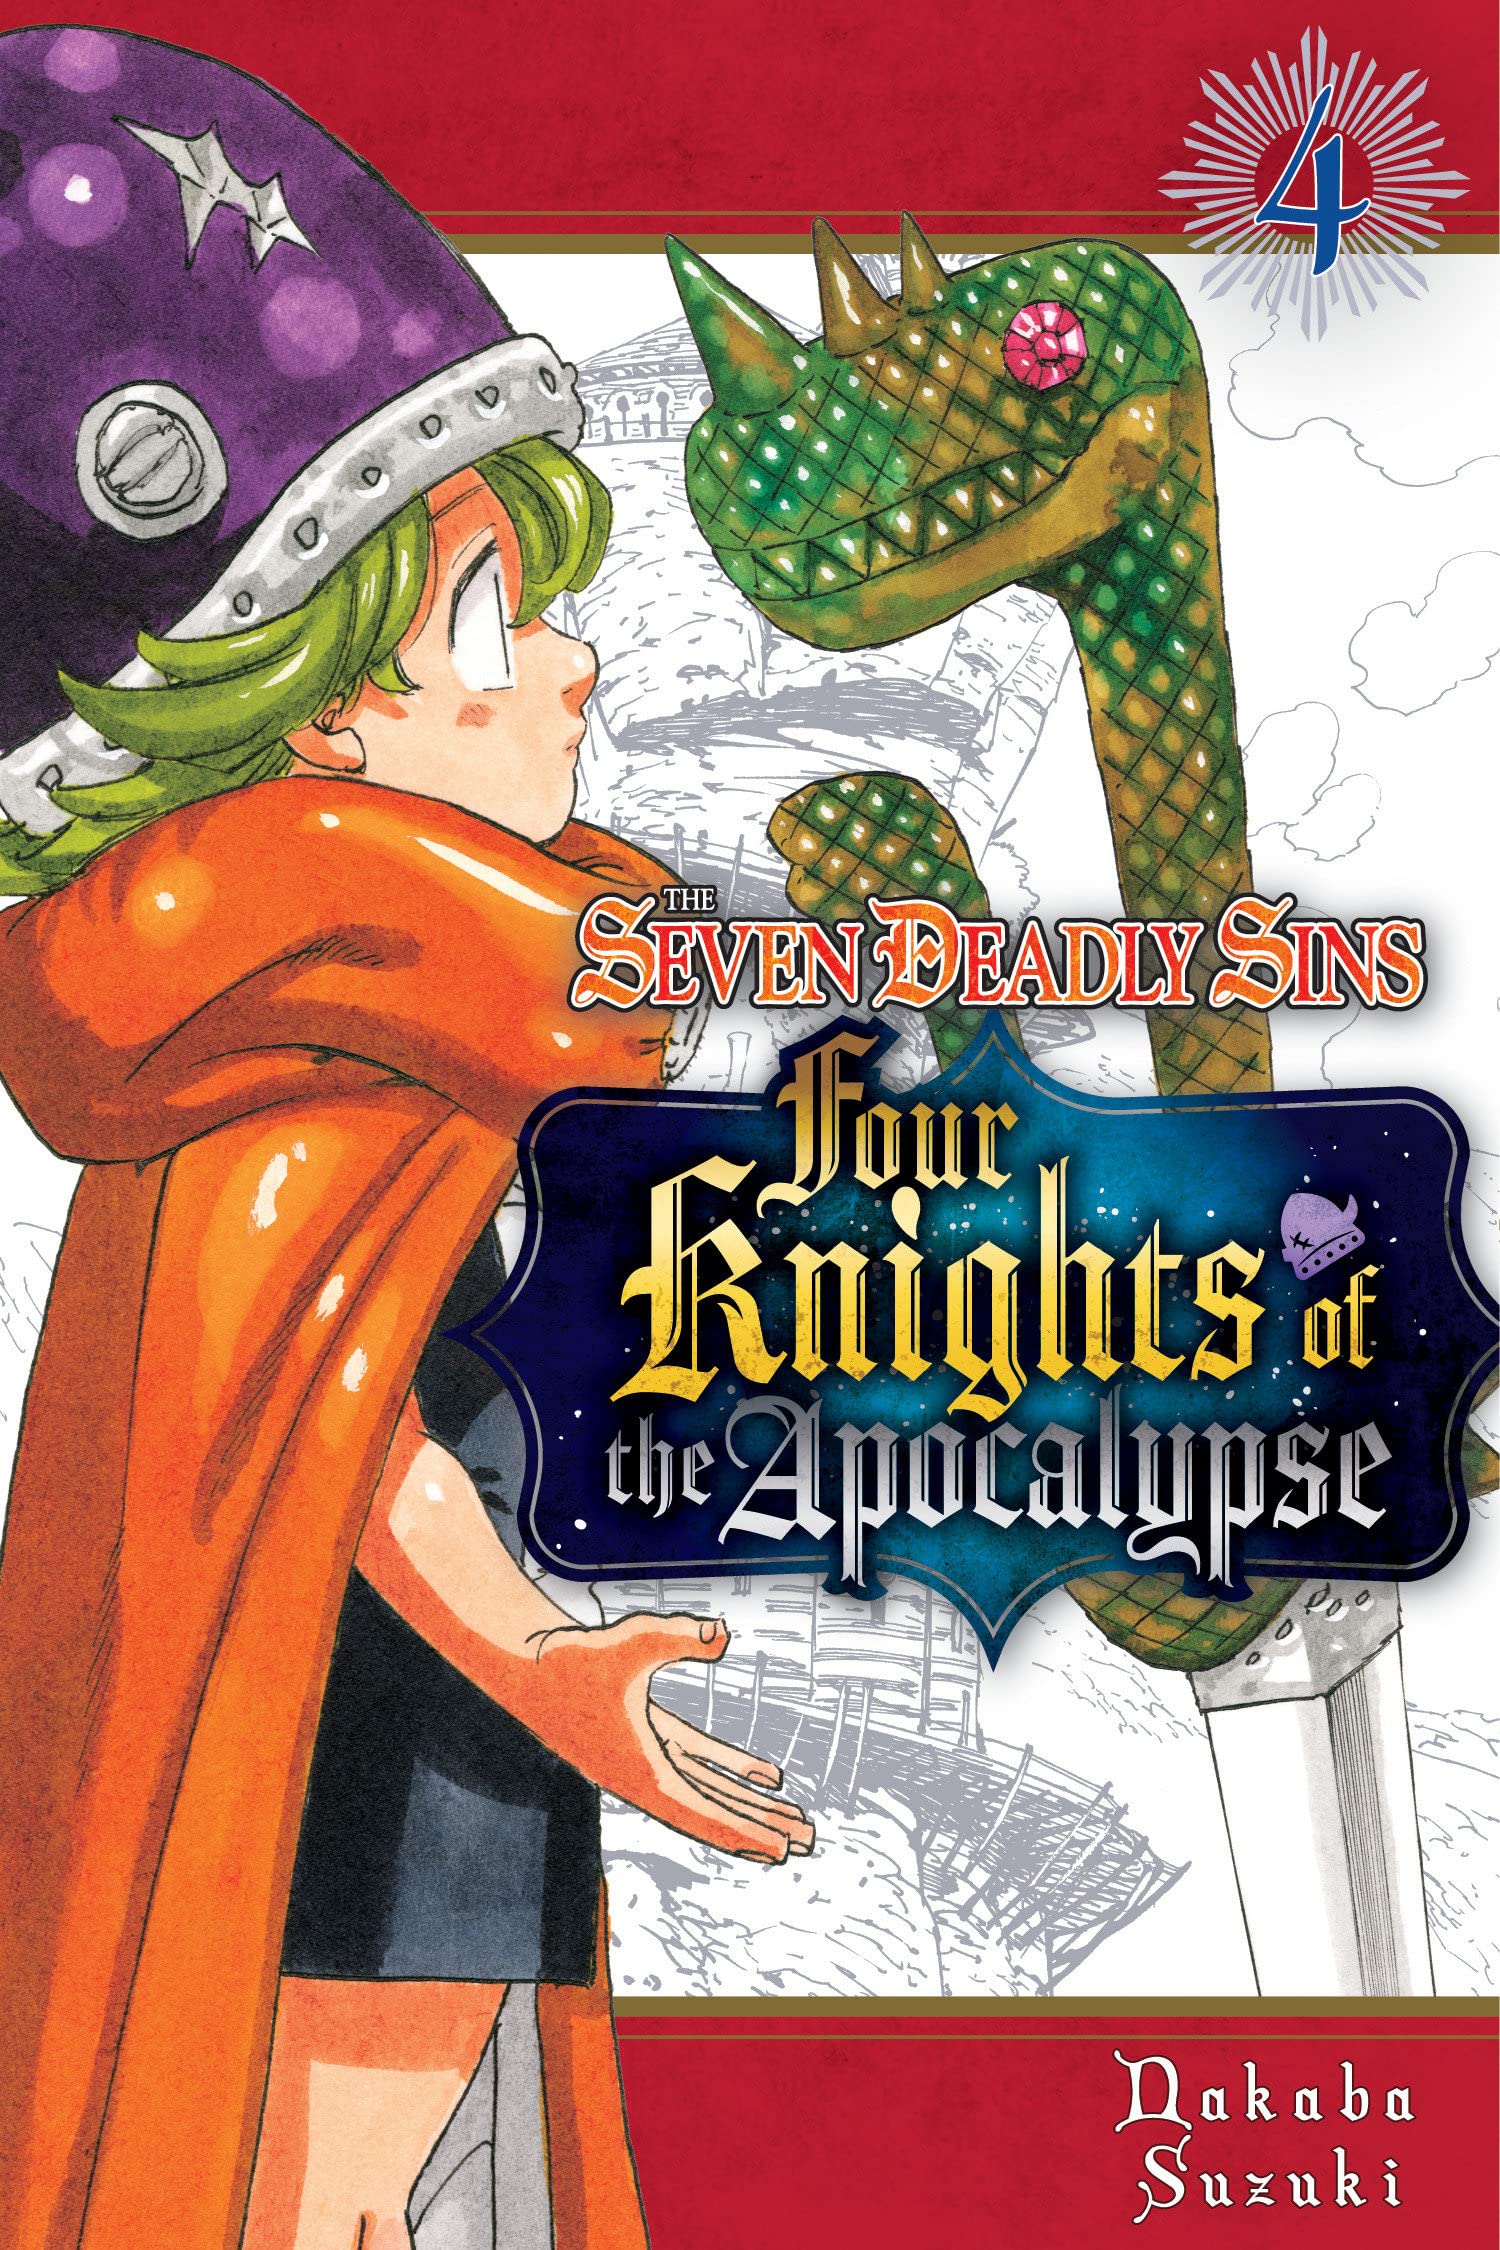 The Seven Deadly Sins: Four Knights of the Apocalypse Vol. 04